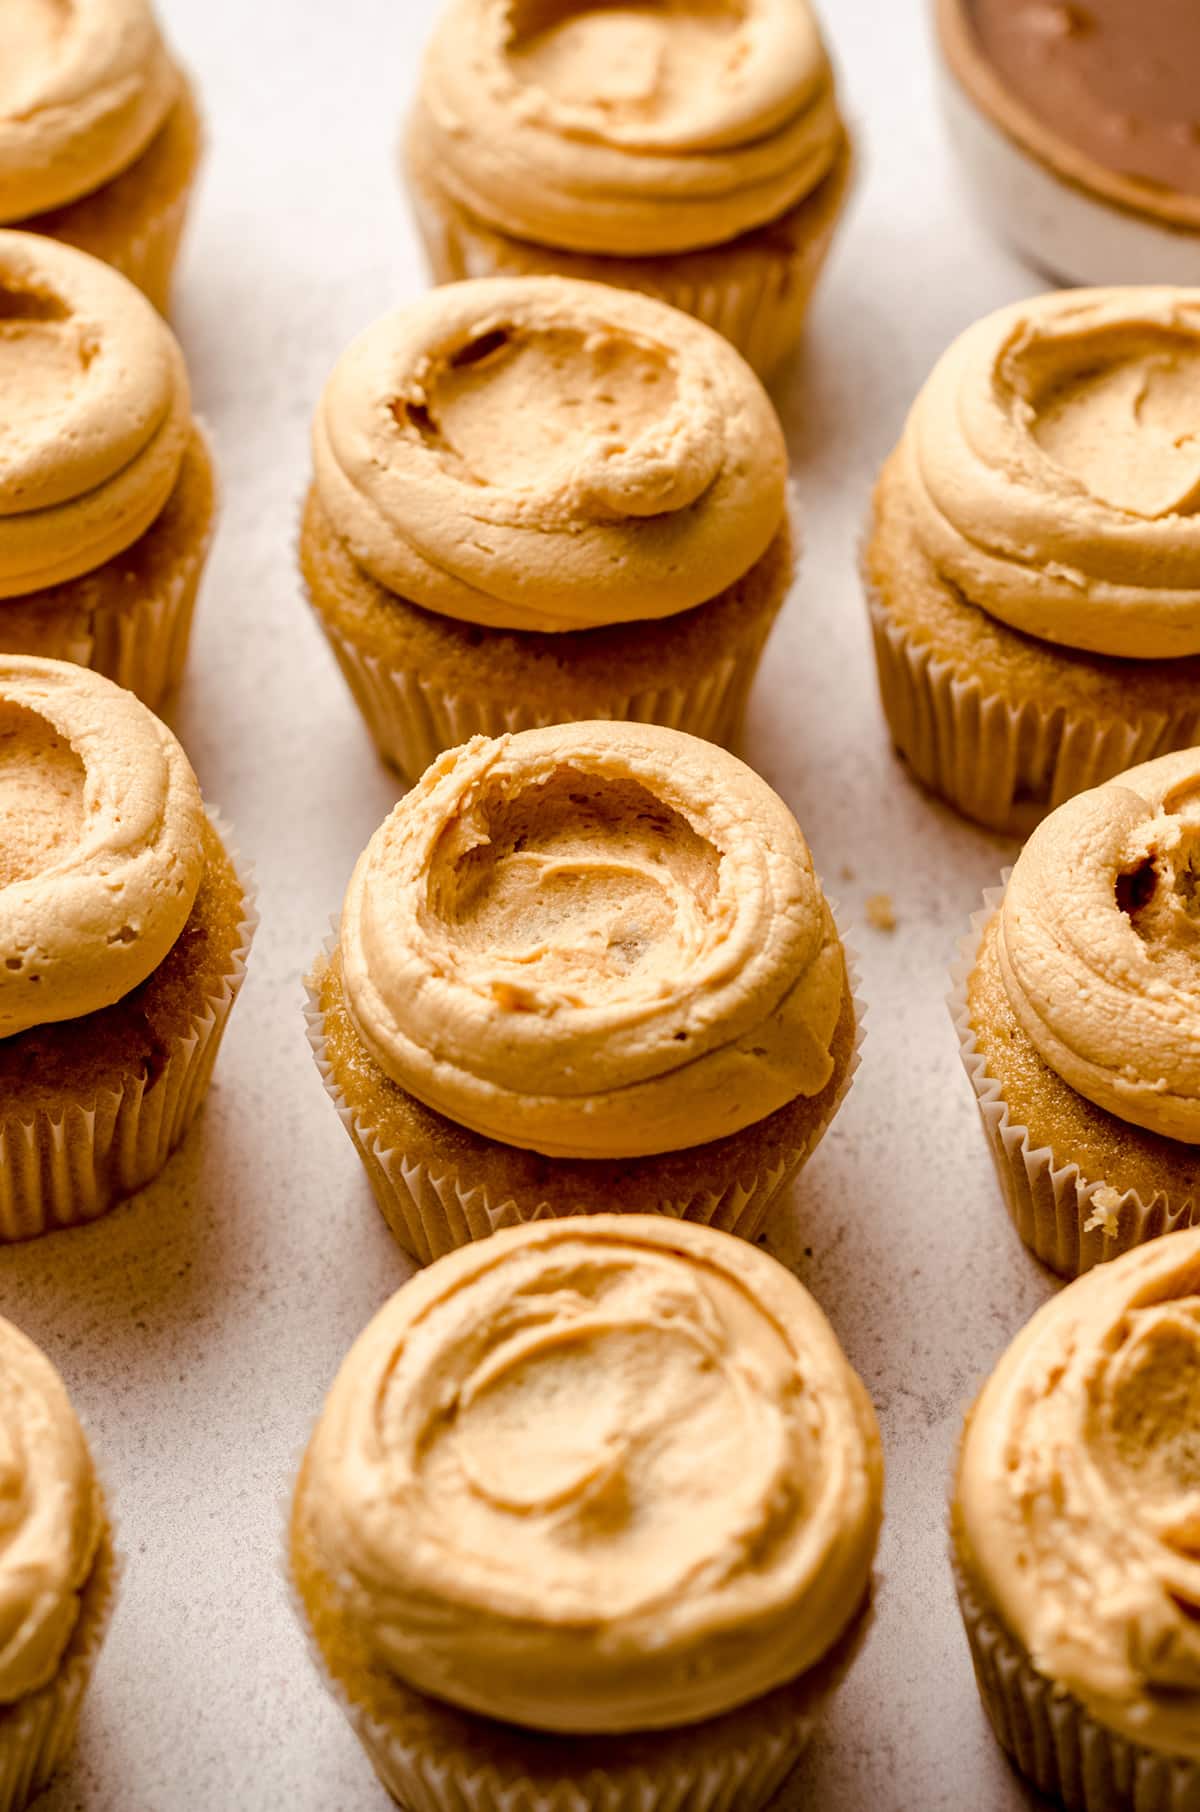 Cupcakes topped with dulce de leche buttercream, with the center dipped in.